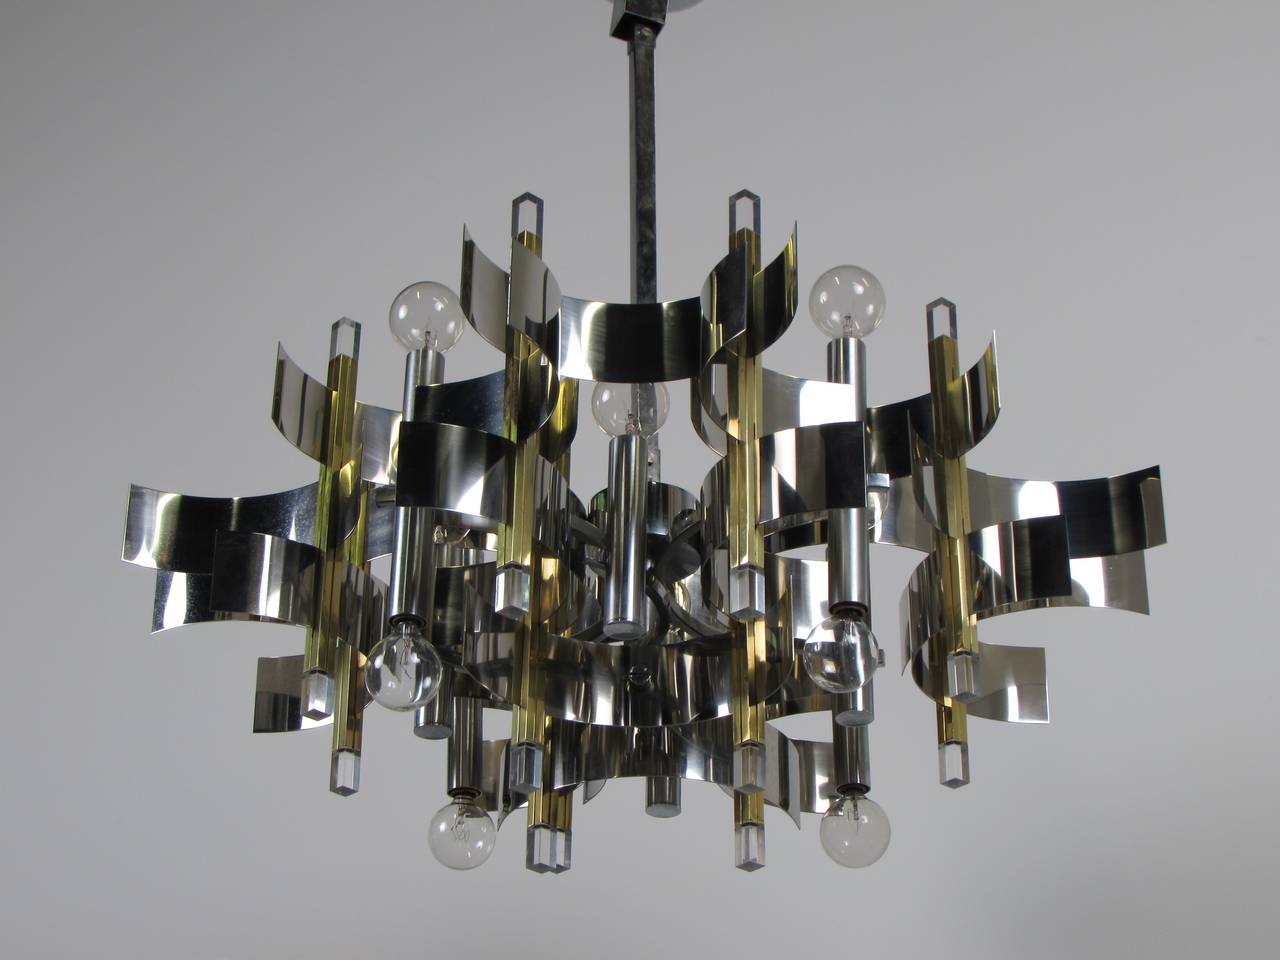 Sculptural brass, chrome and Lucite chandelier by Gaetano Sciolari, signed 1970s. Composed of demilune strips of chrome woven and stacked around brass bars with Lucite tips. Condition is excellent. Scholar sticker is present.

We offer free